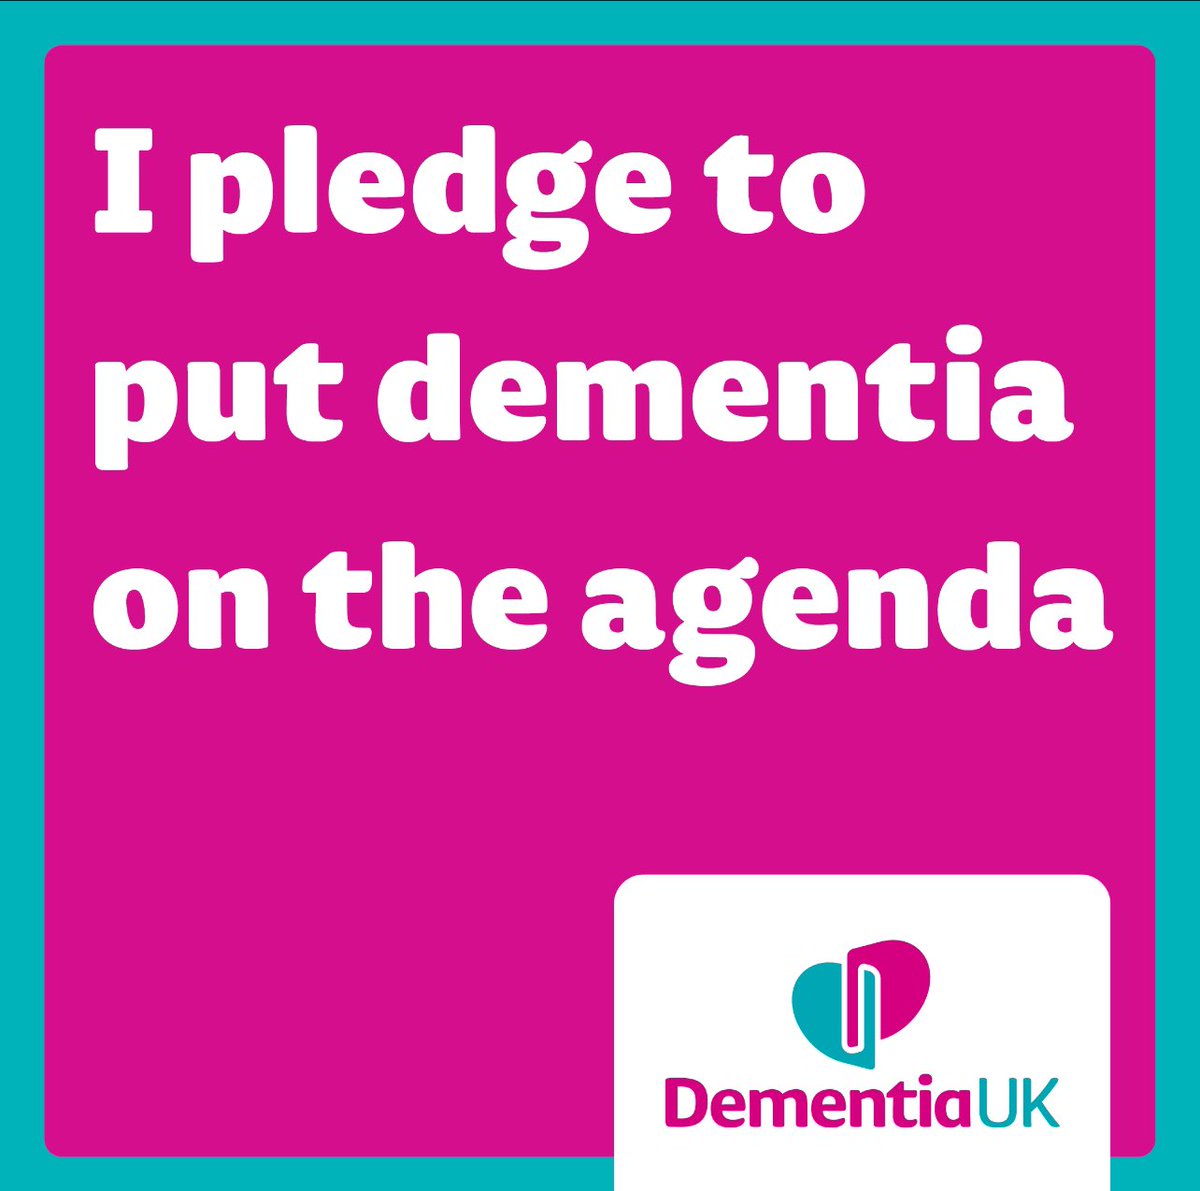 In #DementiaActionWeek I’m remembering my Dad who died of Alzheimers 8 yrs ago. My Mum - now 92 - was his primary carer. It’s the leading cause of death in the UK & it will affect half of us - as carers or sufferers. Time to Put Dementia on the Agenda @DementiaUK @alzheimerssoc